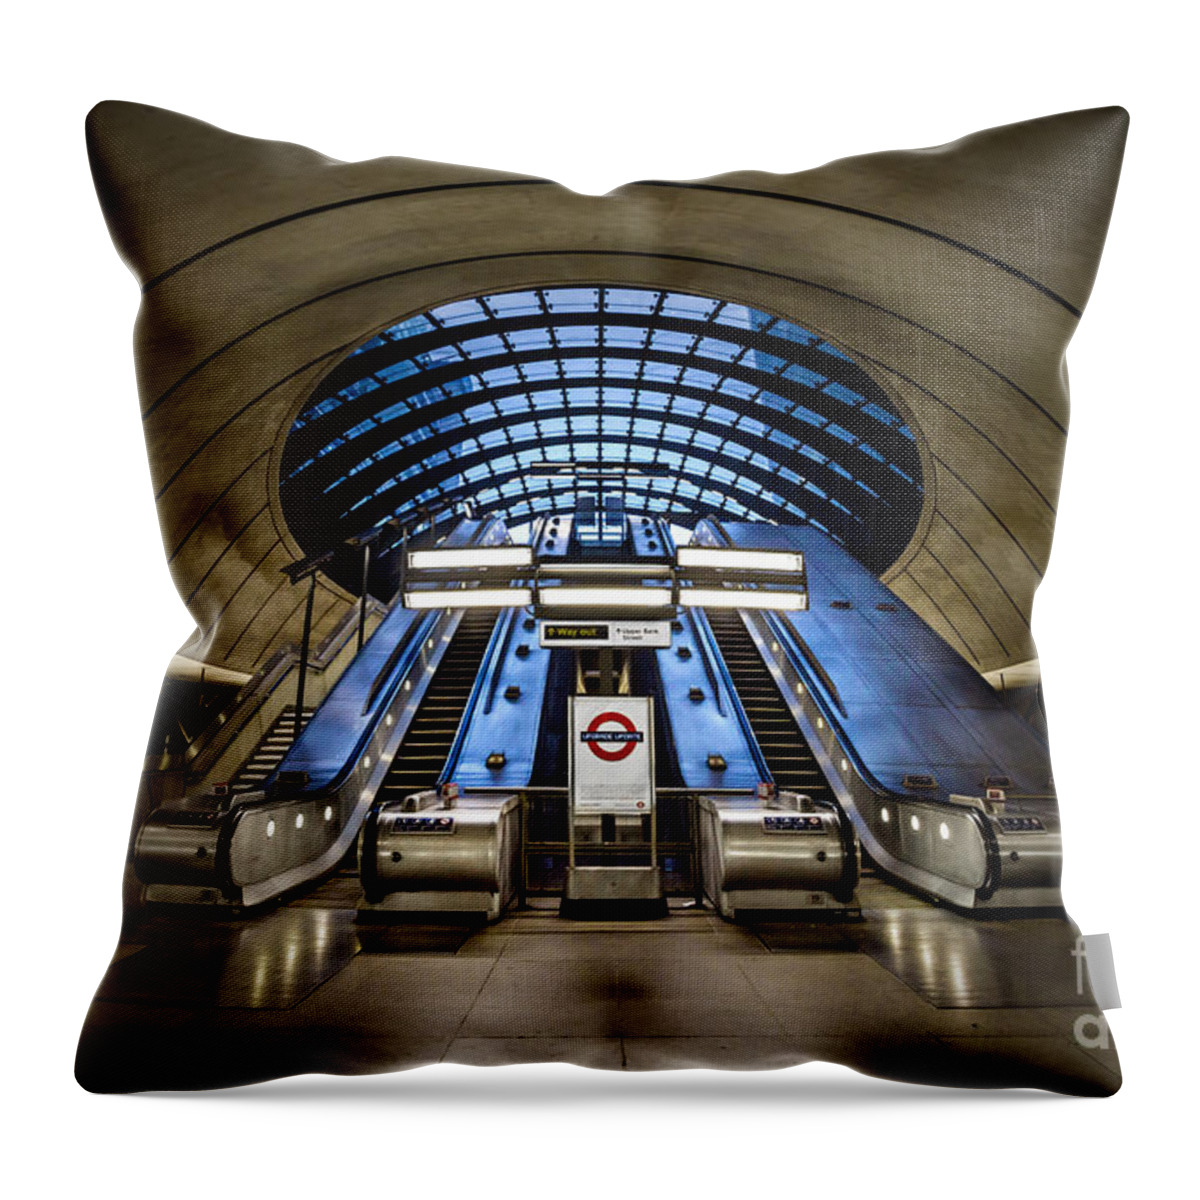 Kremsdorf Throw Pillow featuring the photograph Bound For The Underground by Evelina Kremsdorf